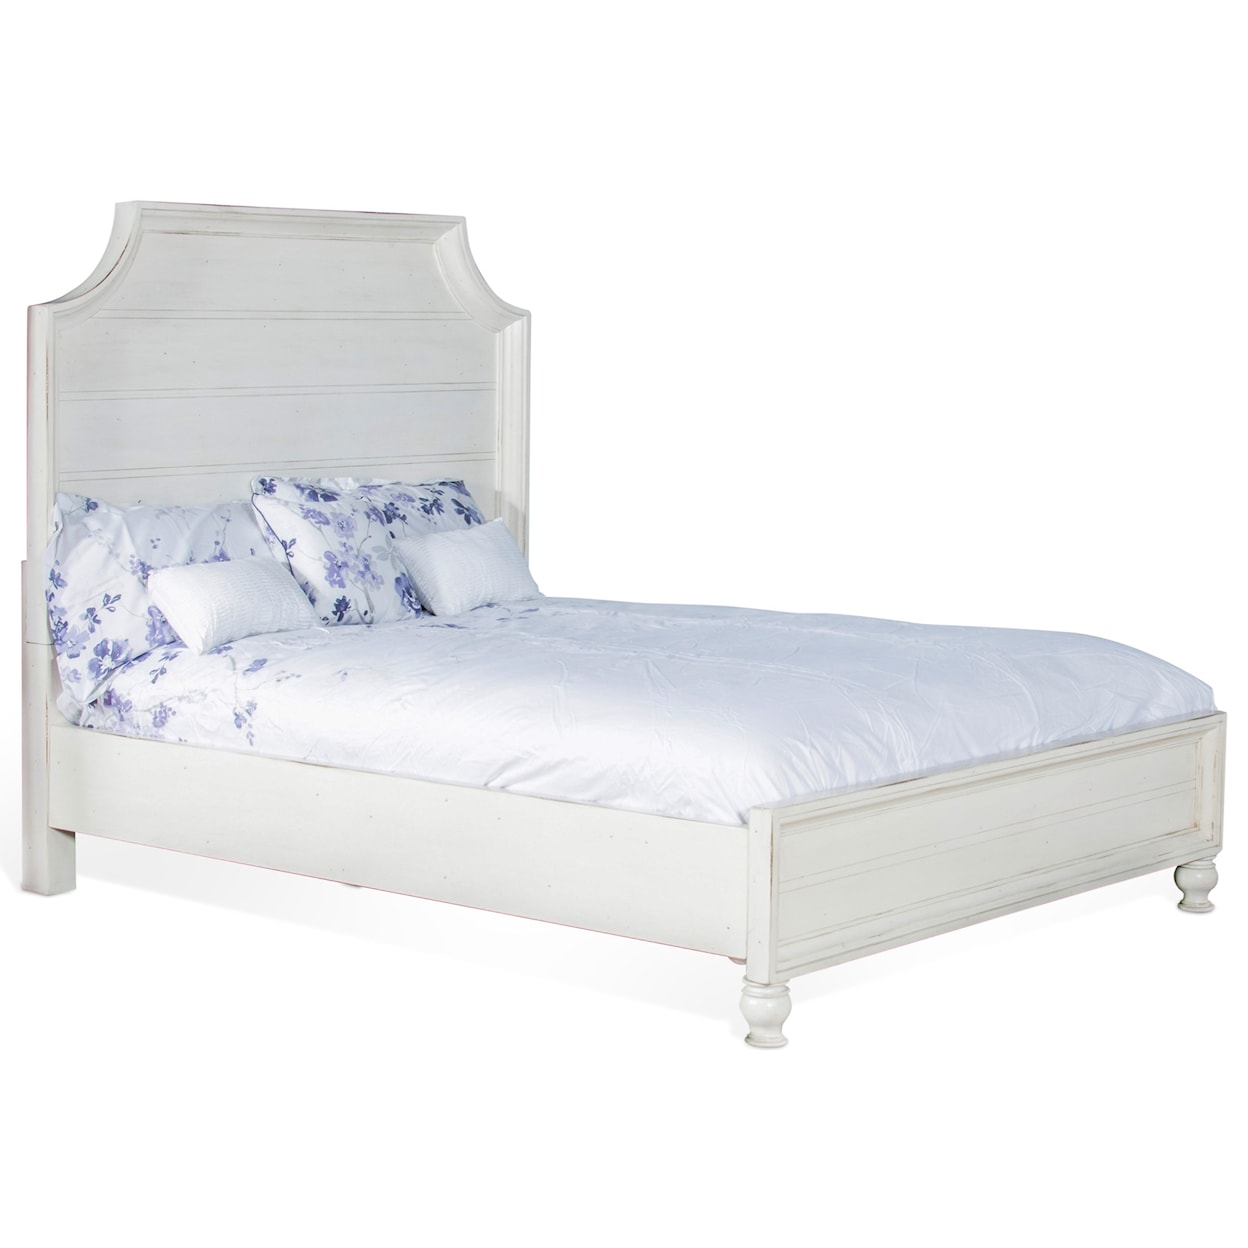 Sunny Designs Carriage House King Bed